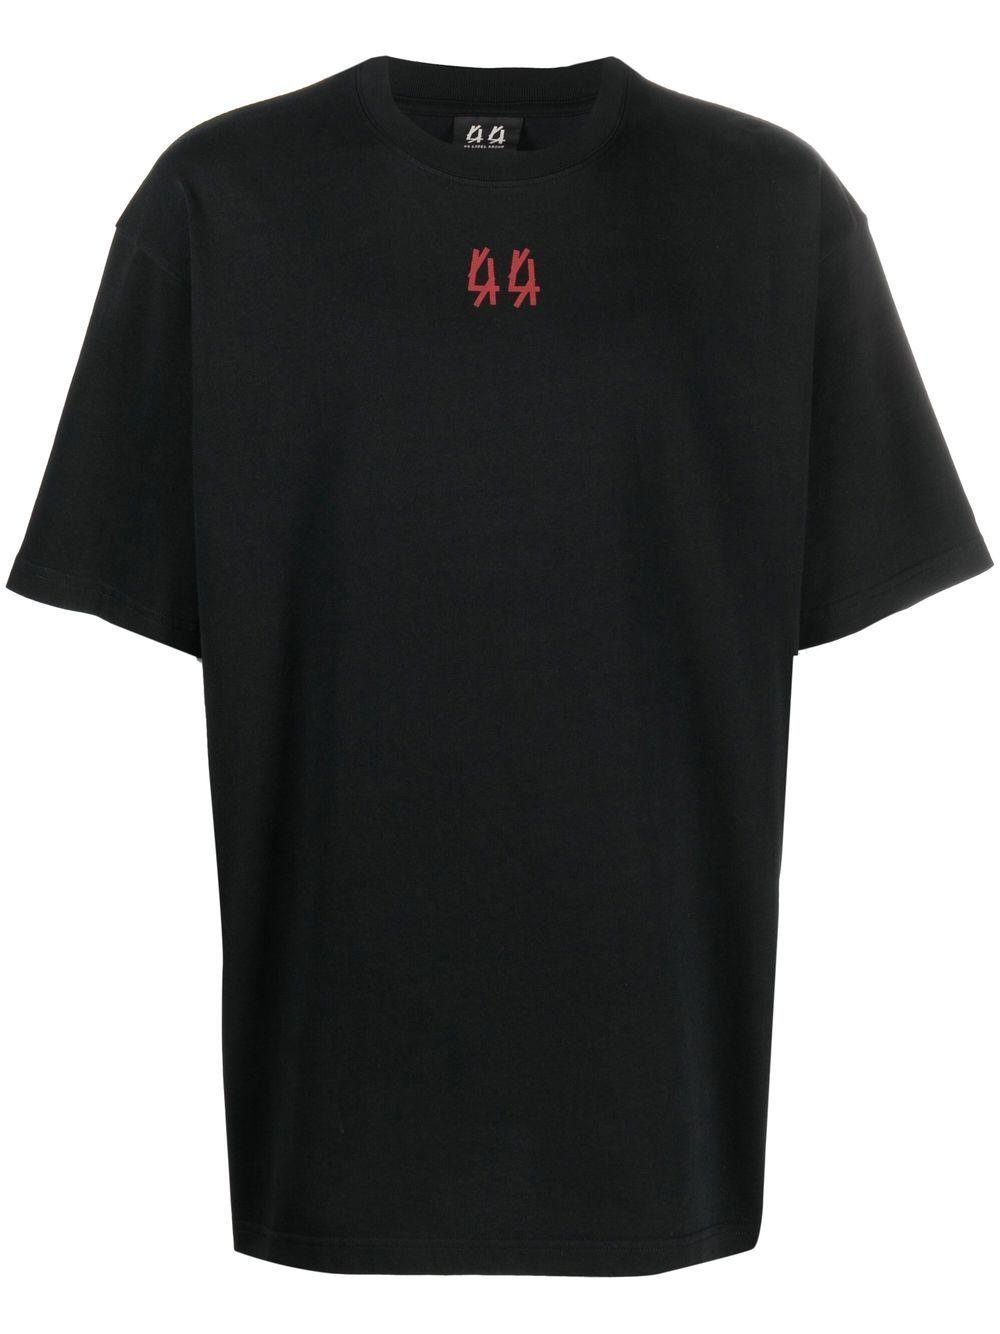 44 Label Group Berlin Life Graphic T-shirt in Black | Lyst